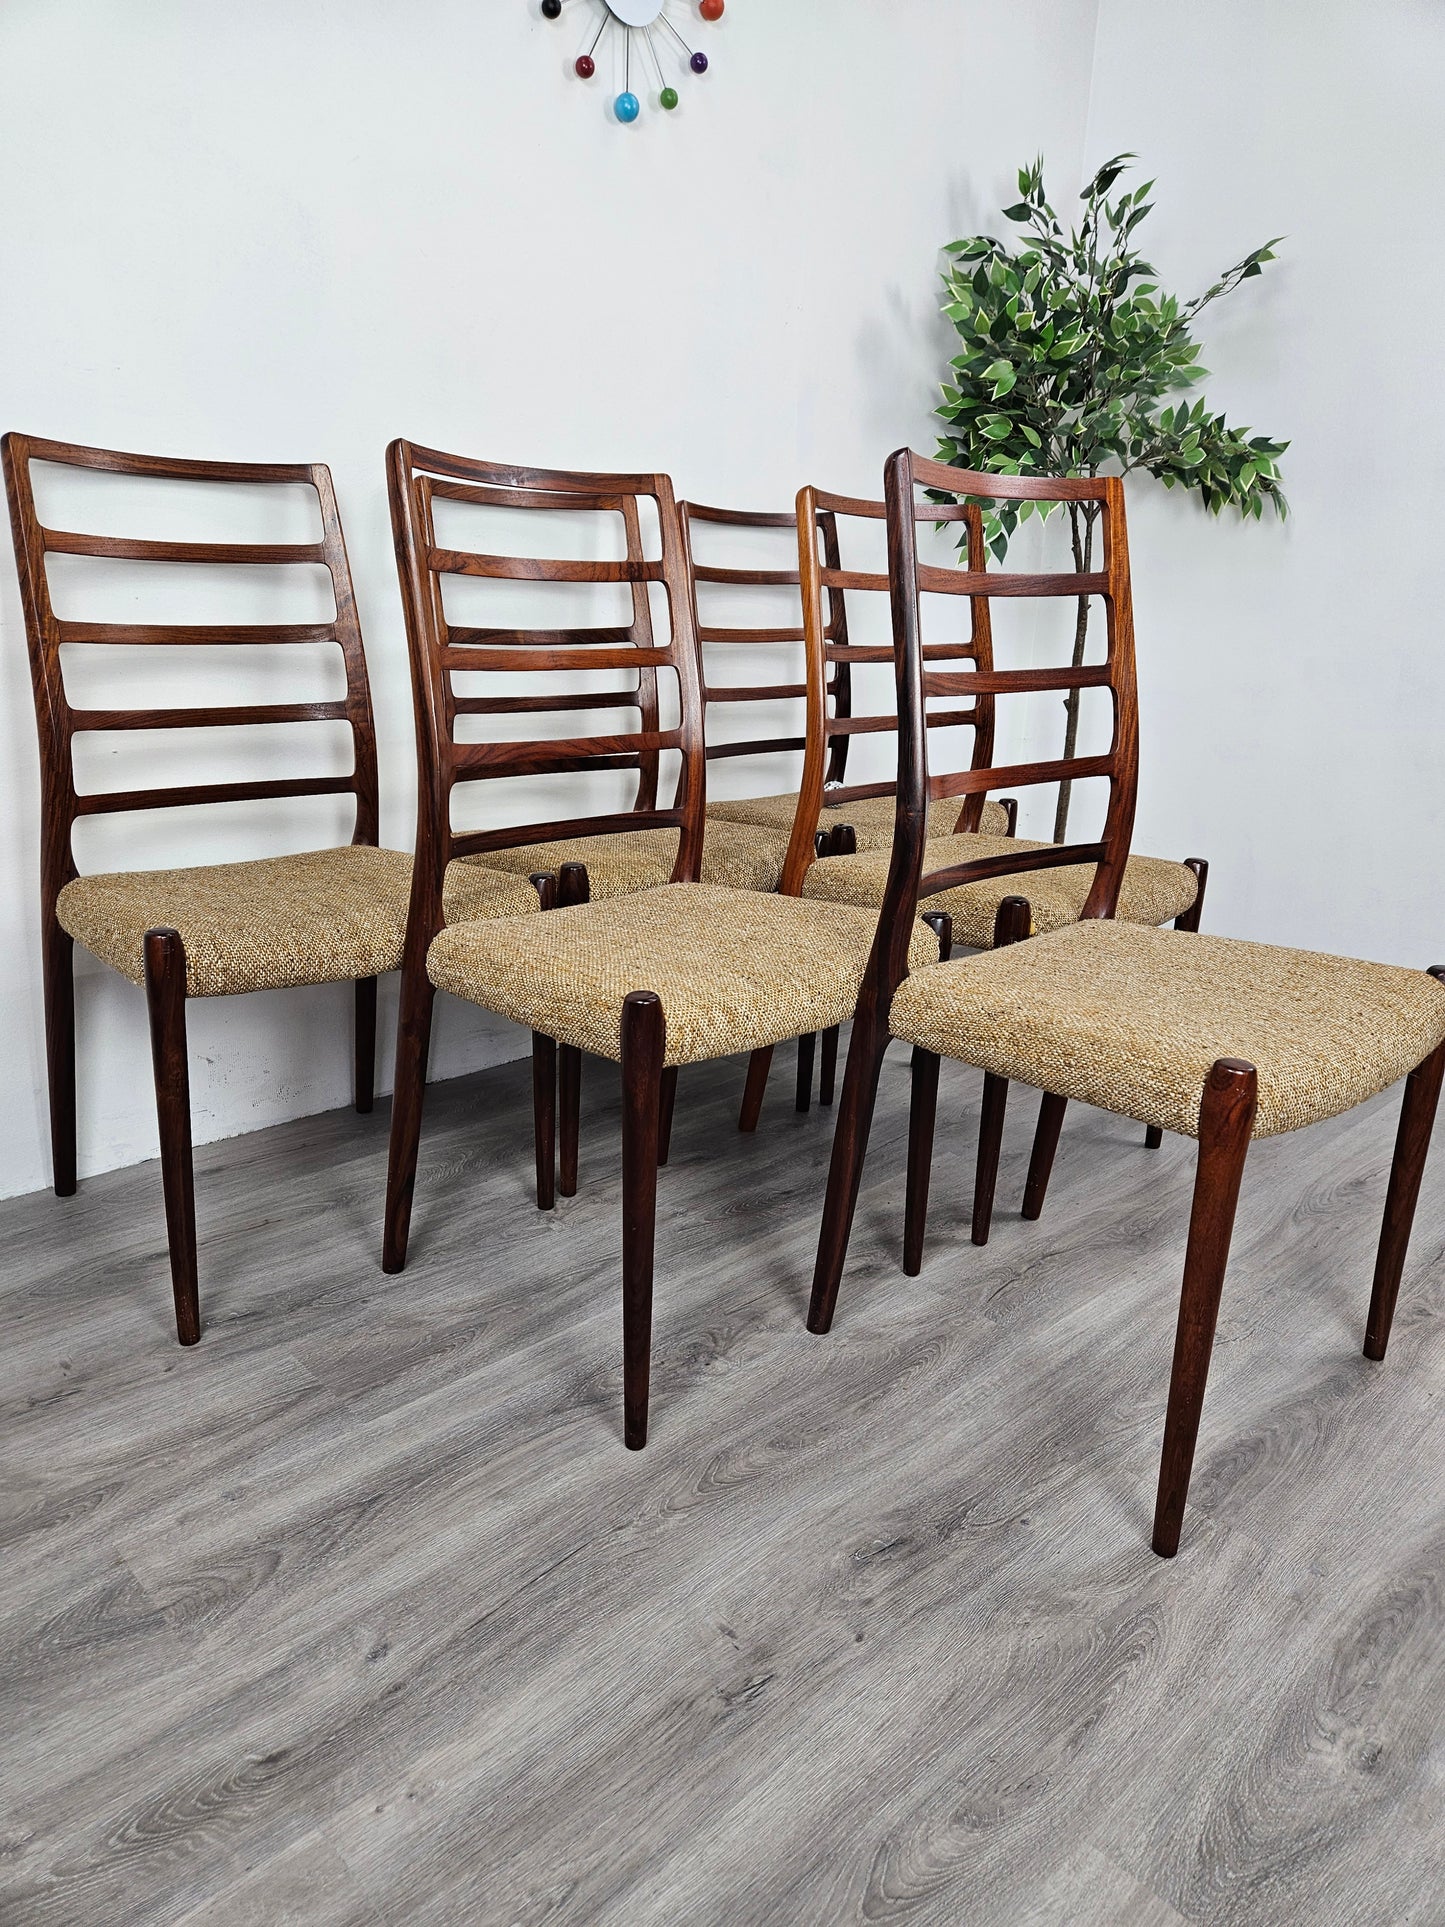 Neils Moller Model 82 Dining Chairs Set of 6